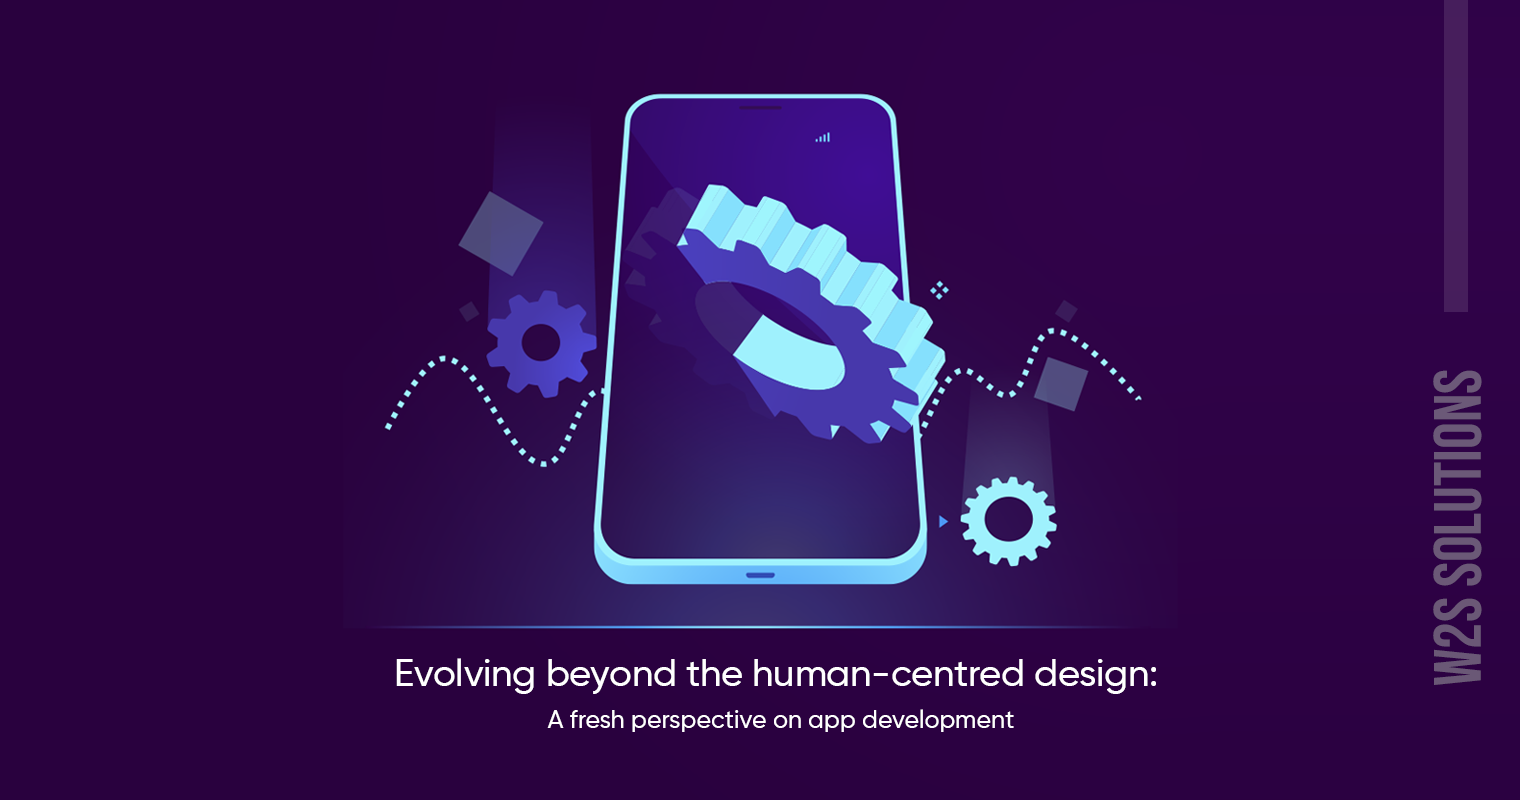 Evolving beyond the human-centred design: A fresh perspective on app development